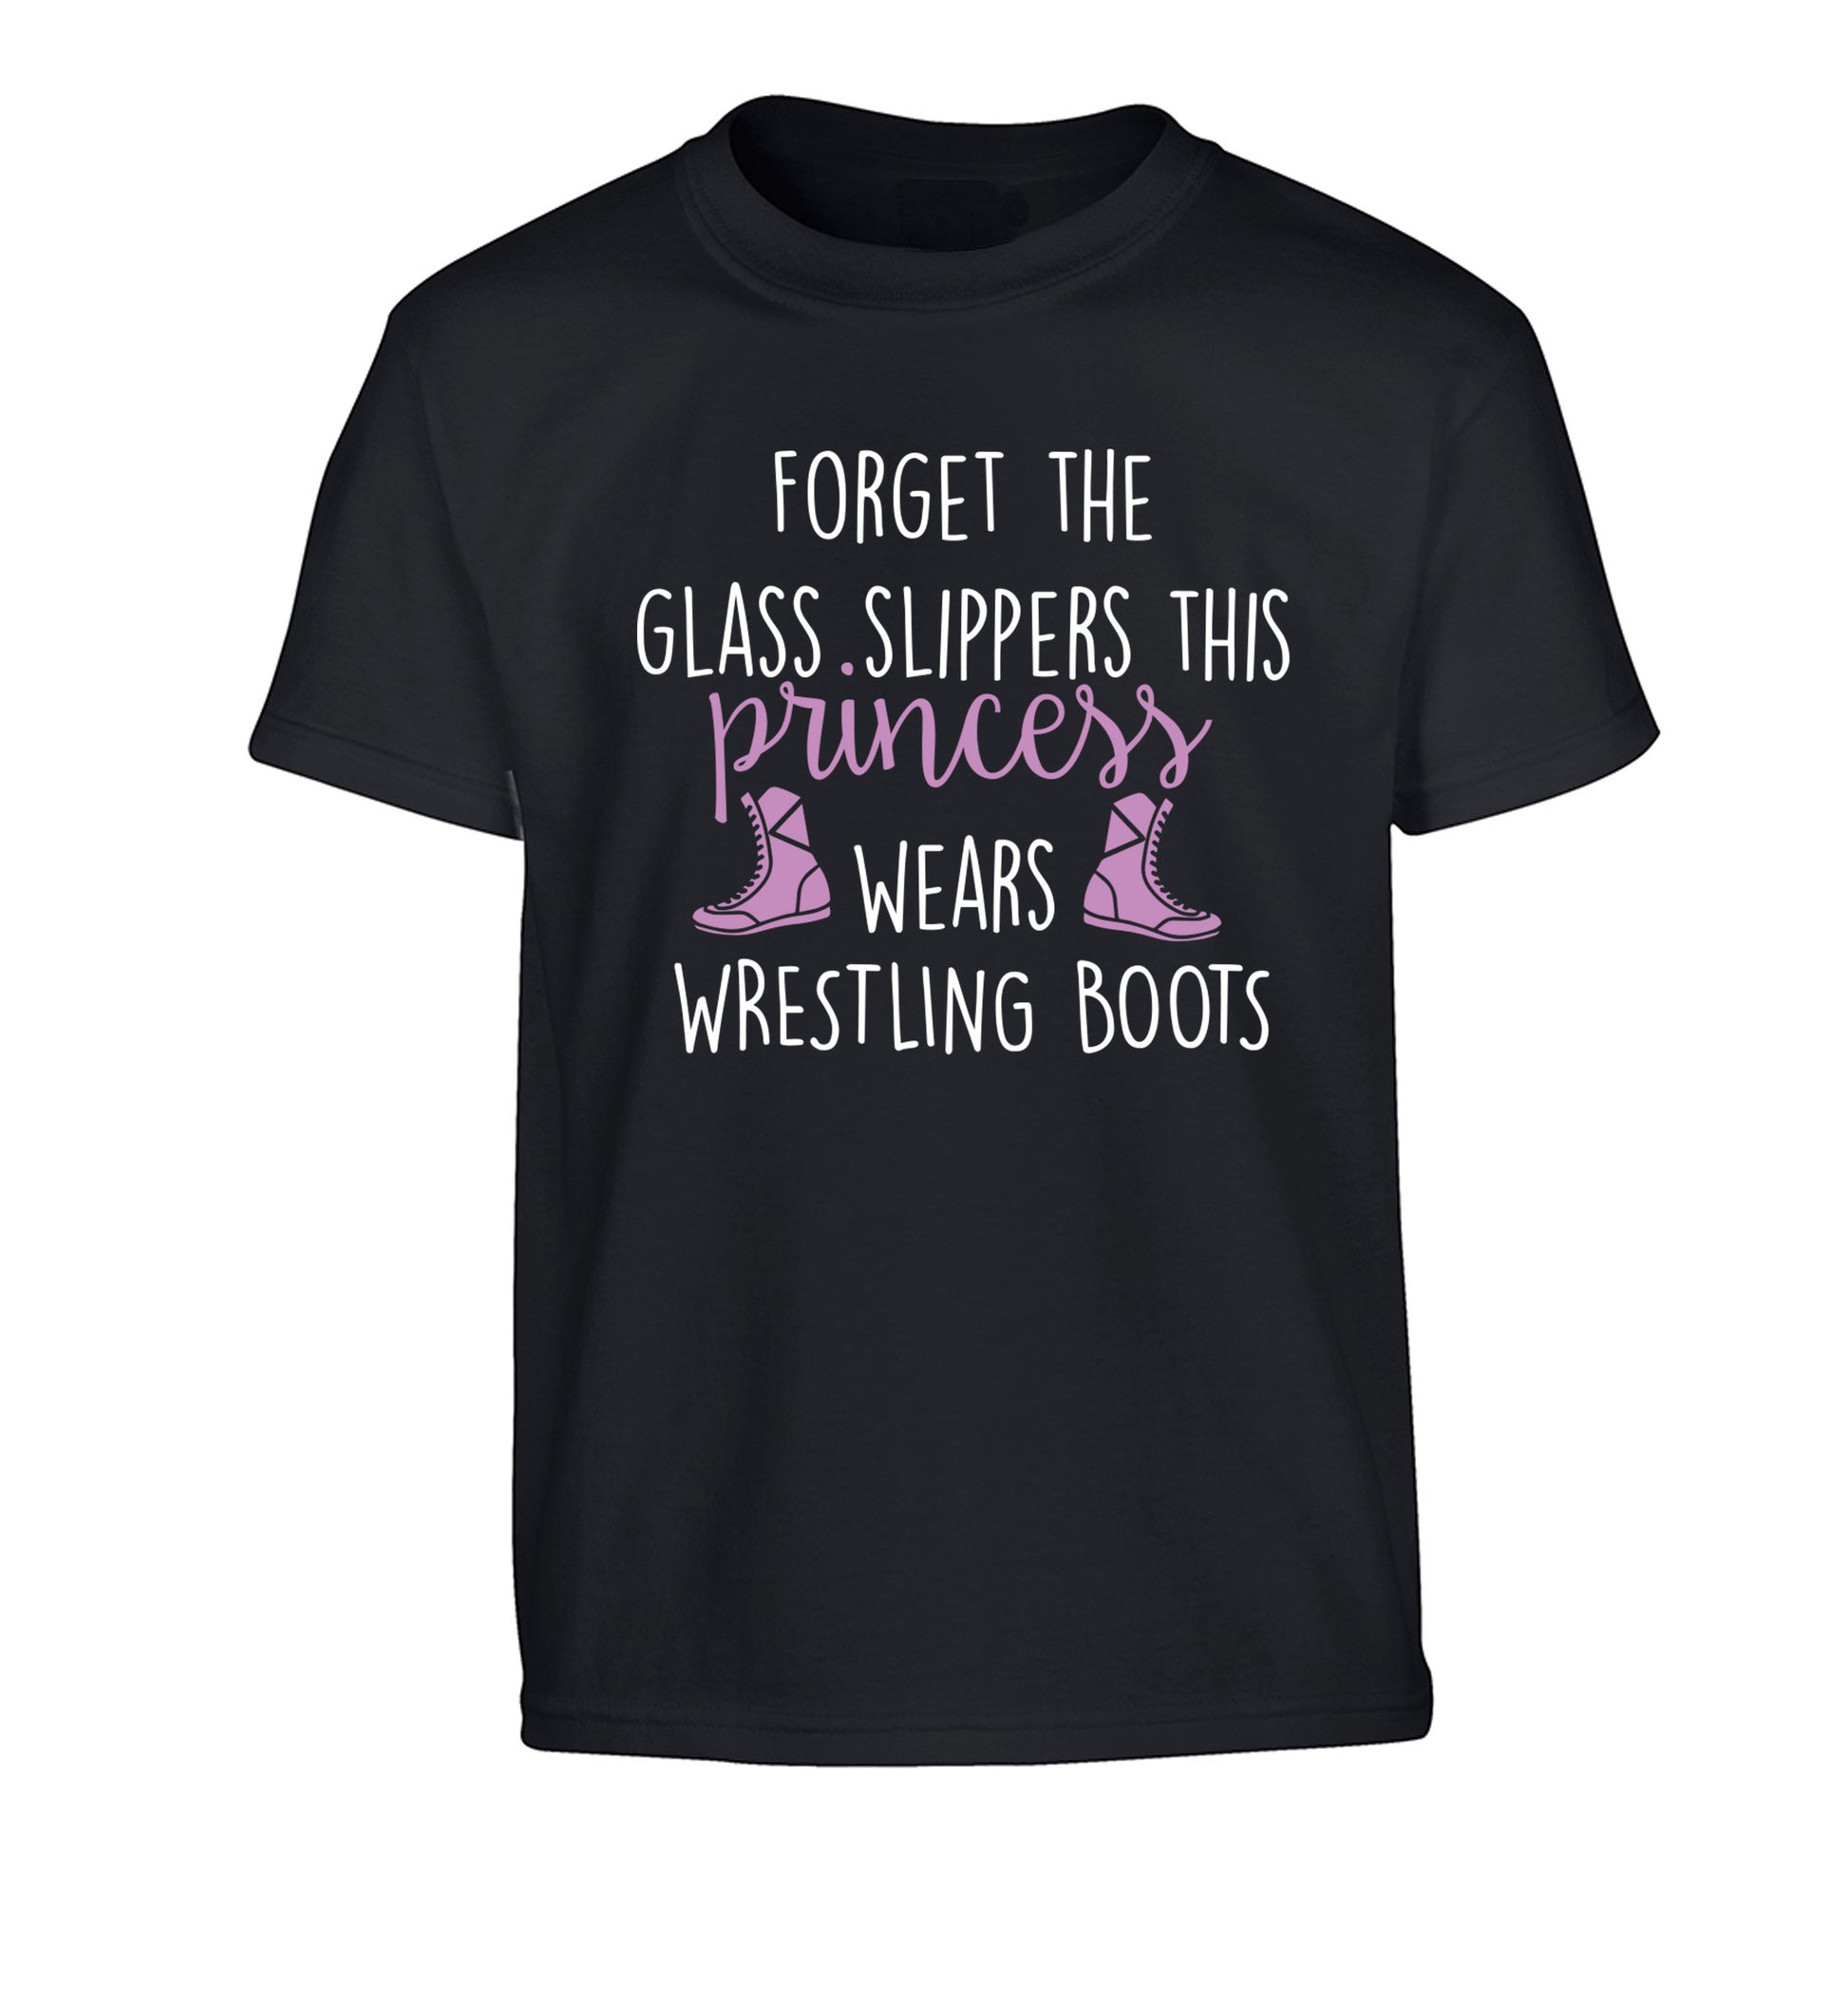 Forget the glass slippers this princess wears wrestling boots Children's black Tshirt 12-14 Years